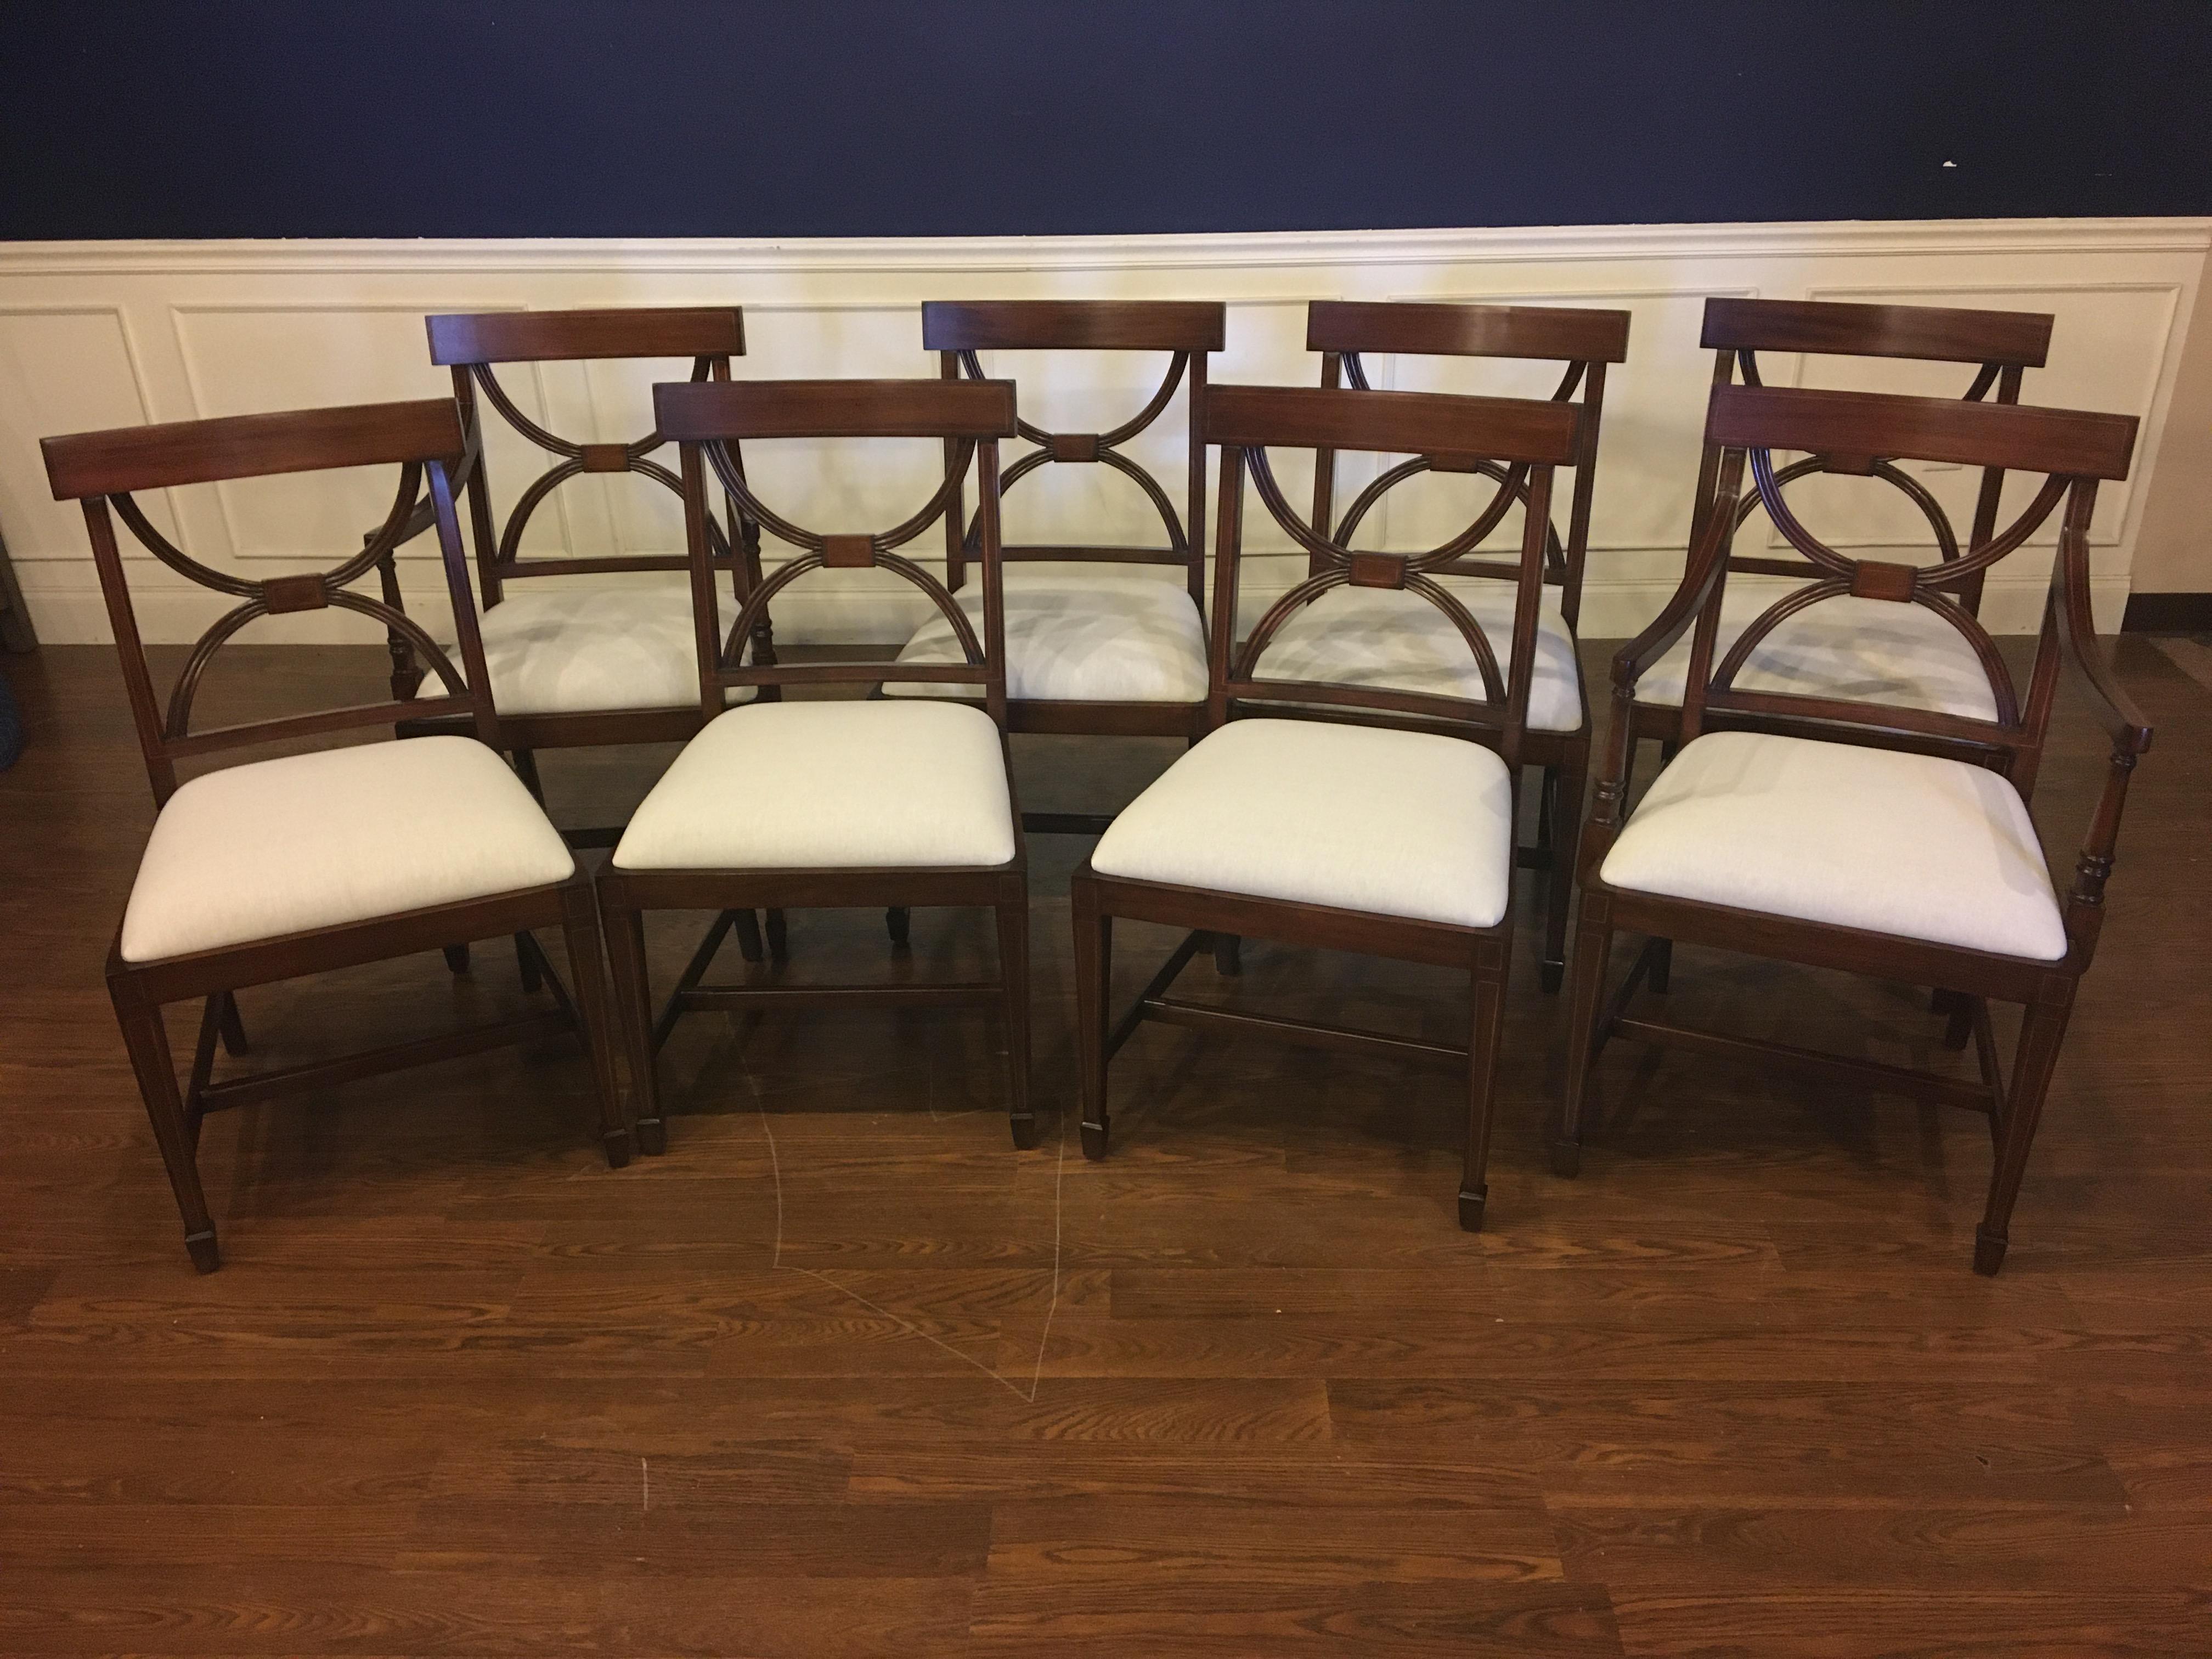 These are new traditional mahogany dining chairs. Their design was inspired by dining chairs from the Regency period. They feature classic Adams styling. They have an understated elegance with square tapered legs and delicate inlays in the backs,